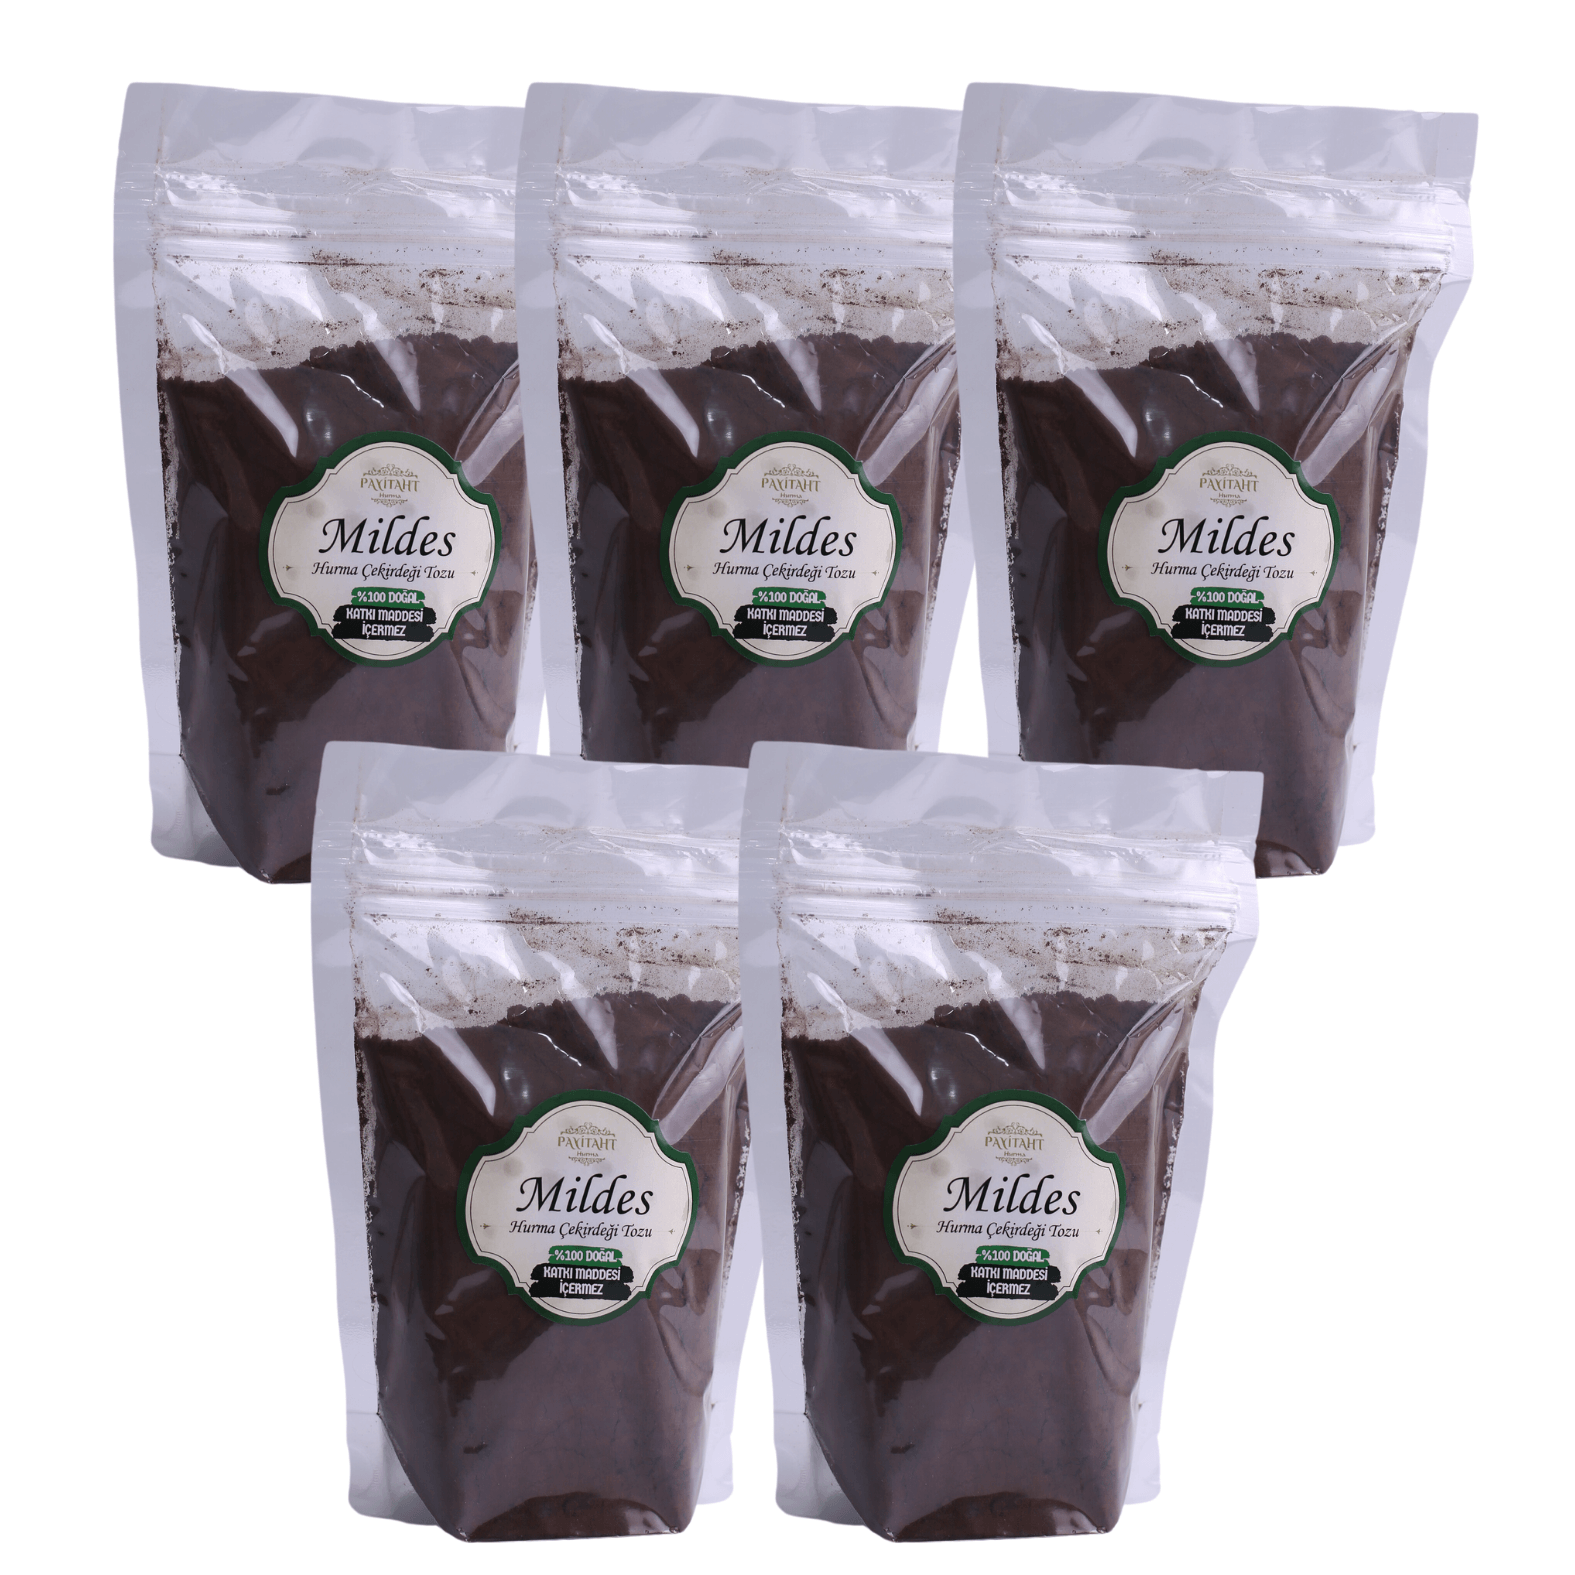 PAYITAHT HURMA-MILDES GROUND PURE DATE SEED POWDER 400 GR 5 PACKAGE